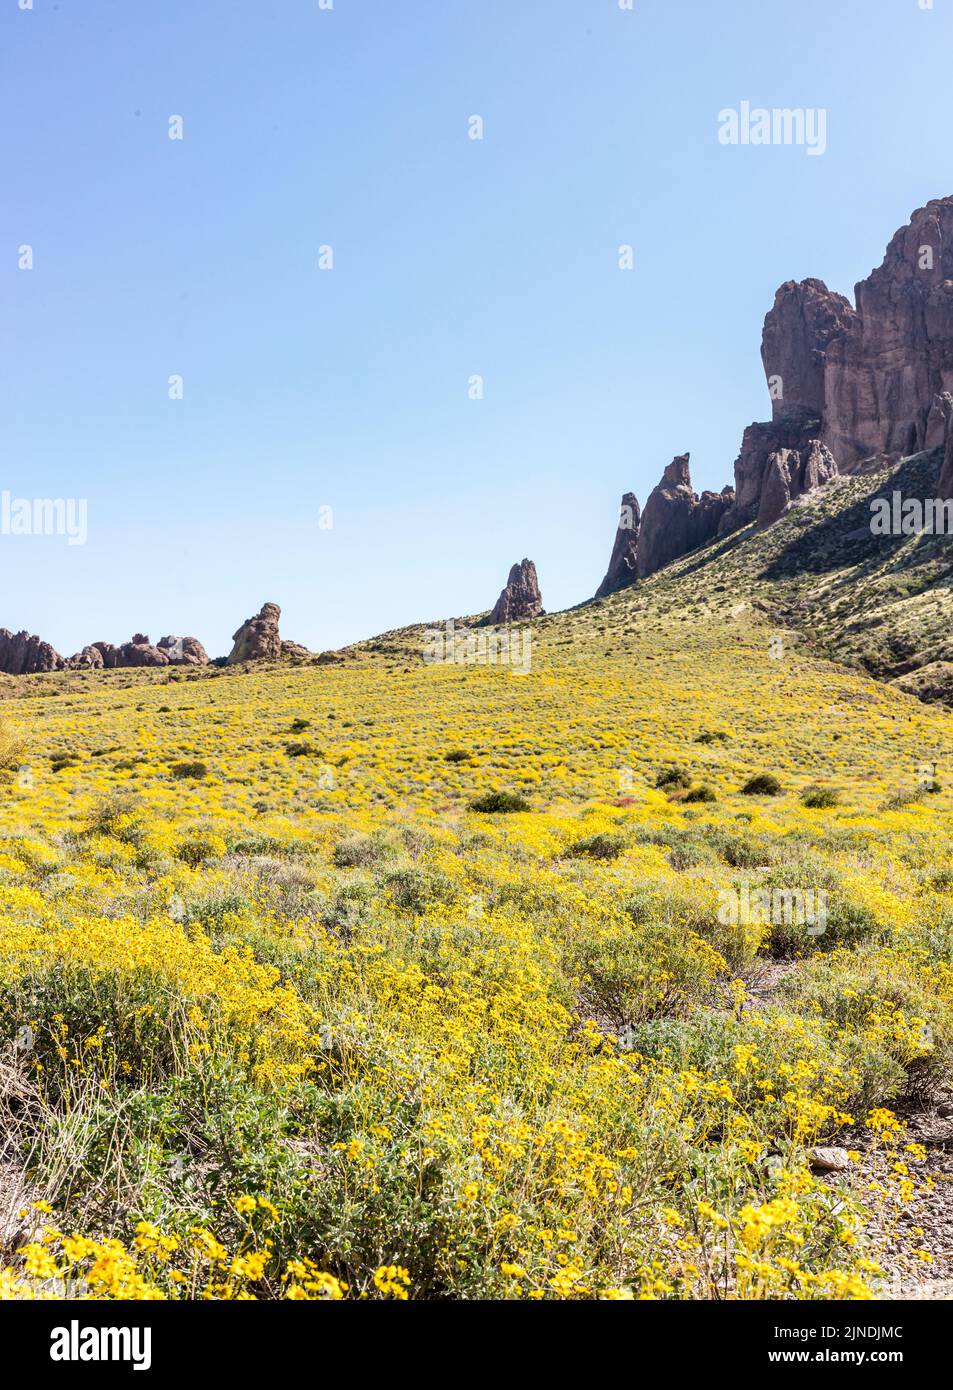 Steep rock formations and yellow Spring flowers below in Lost Dutchman State Park, Arizona, USA. Stock Photo